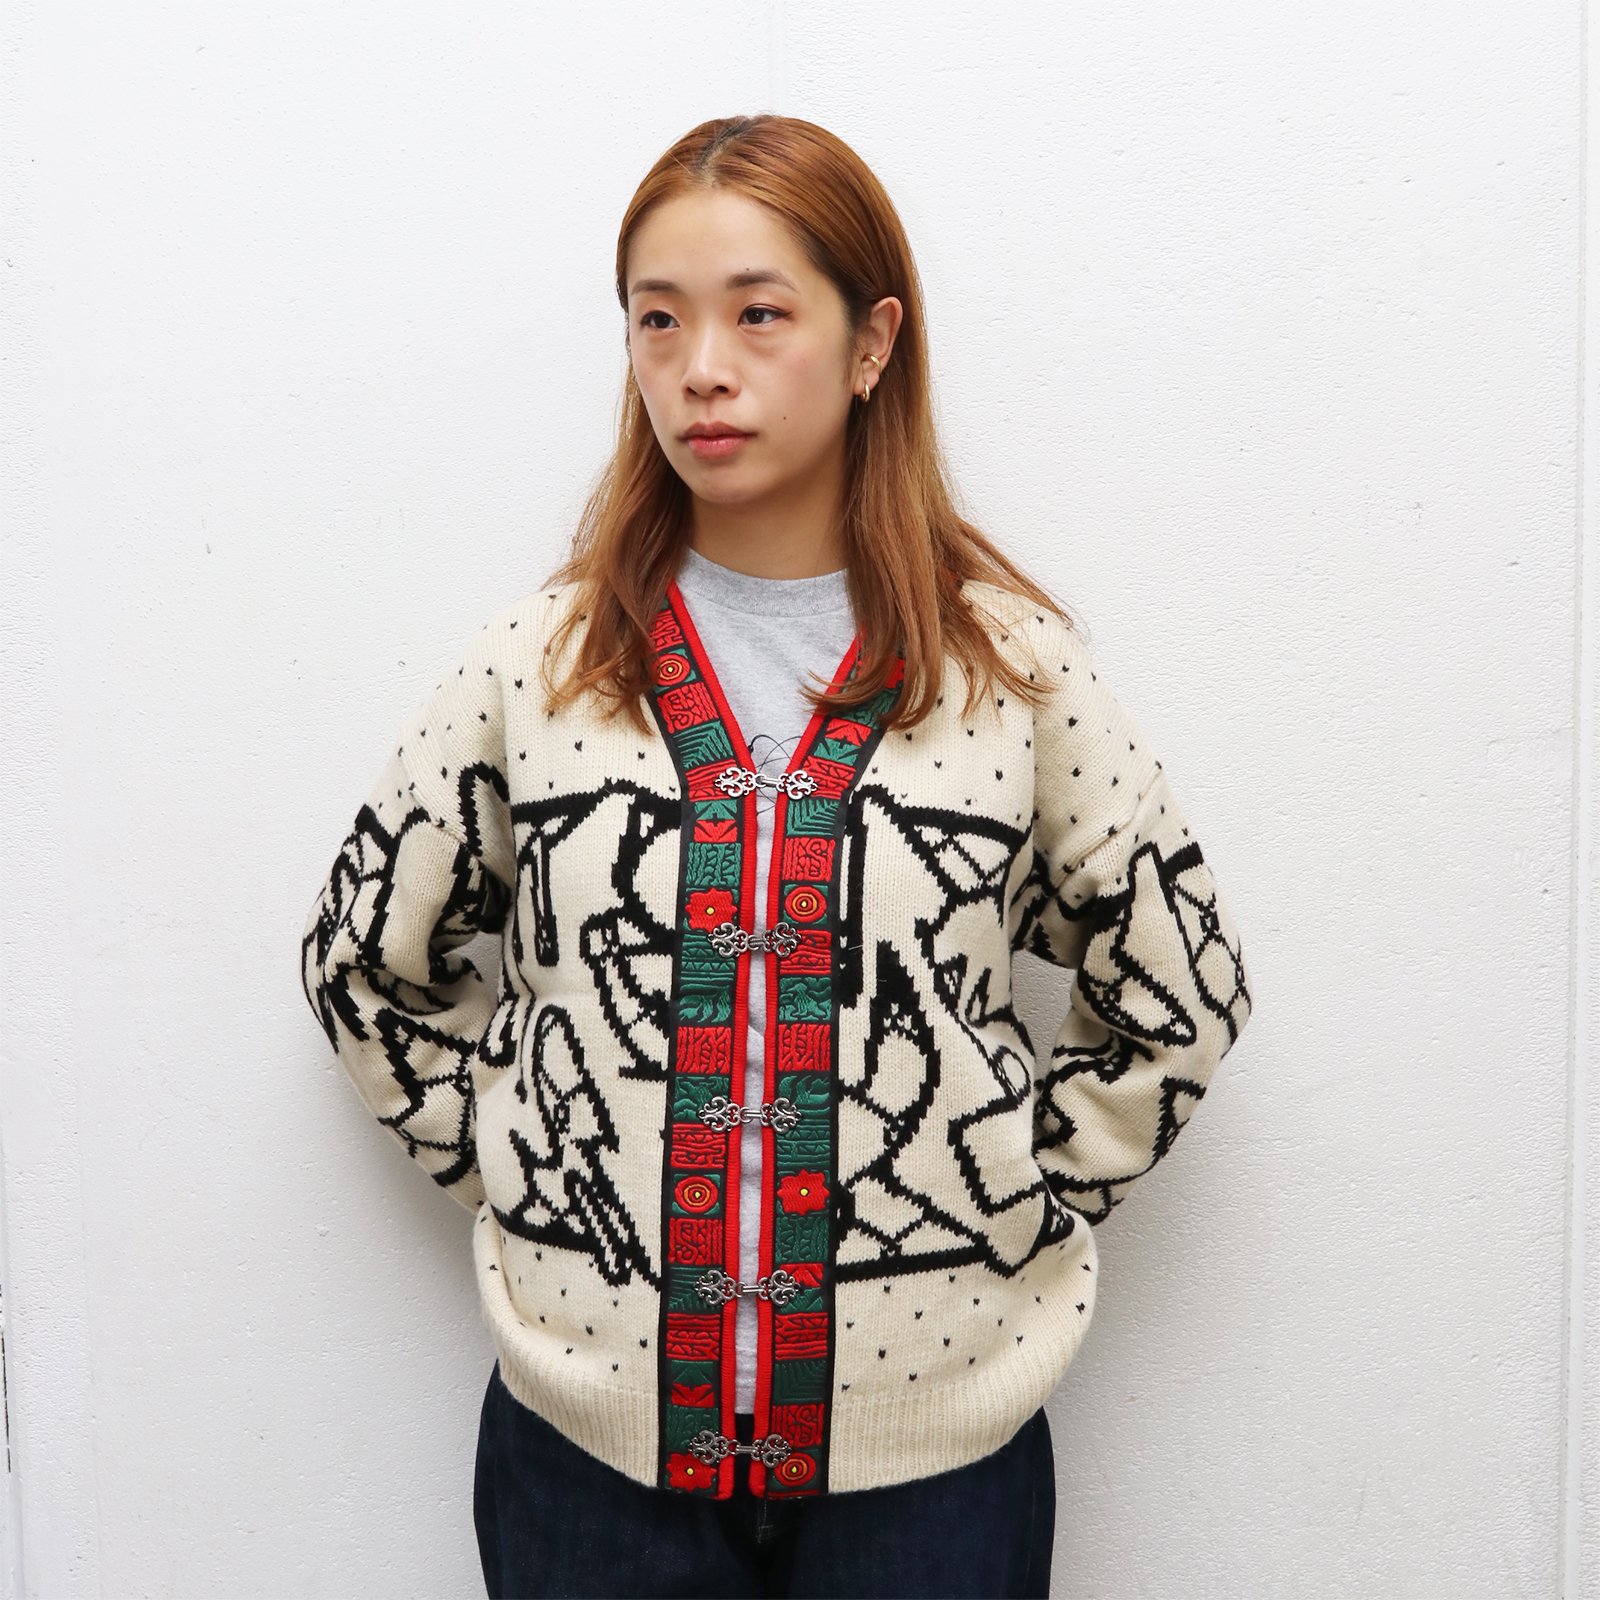 WHIMSY TYROLEAN SWEATER一度のみ着用美品です - tsm.ac.in